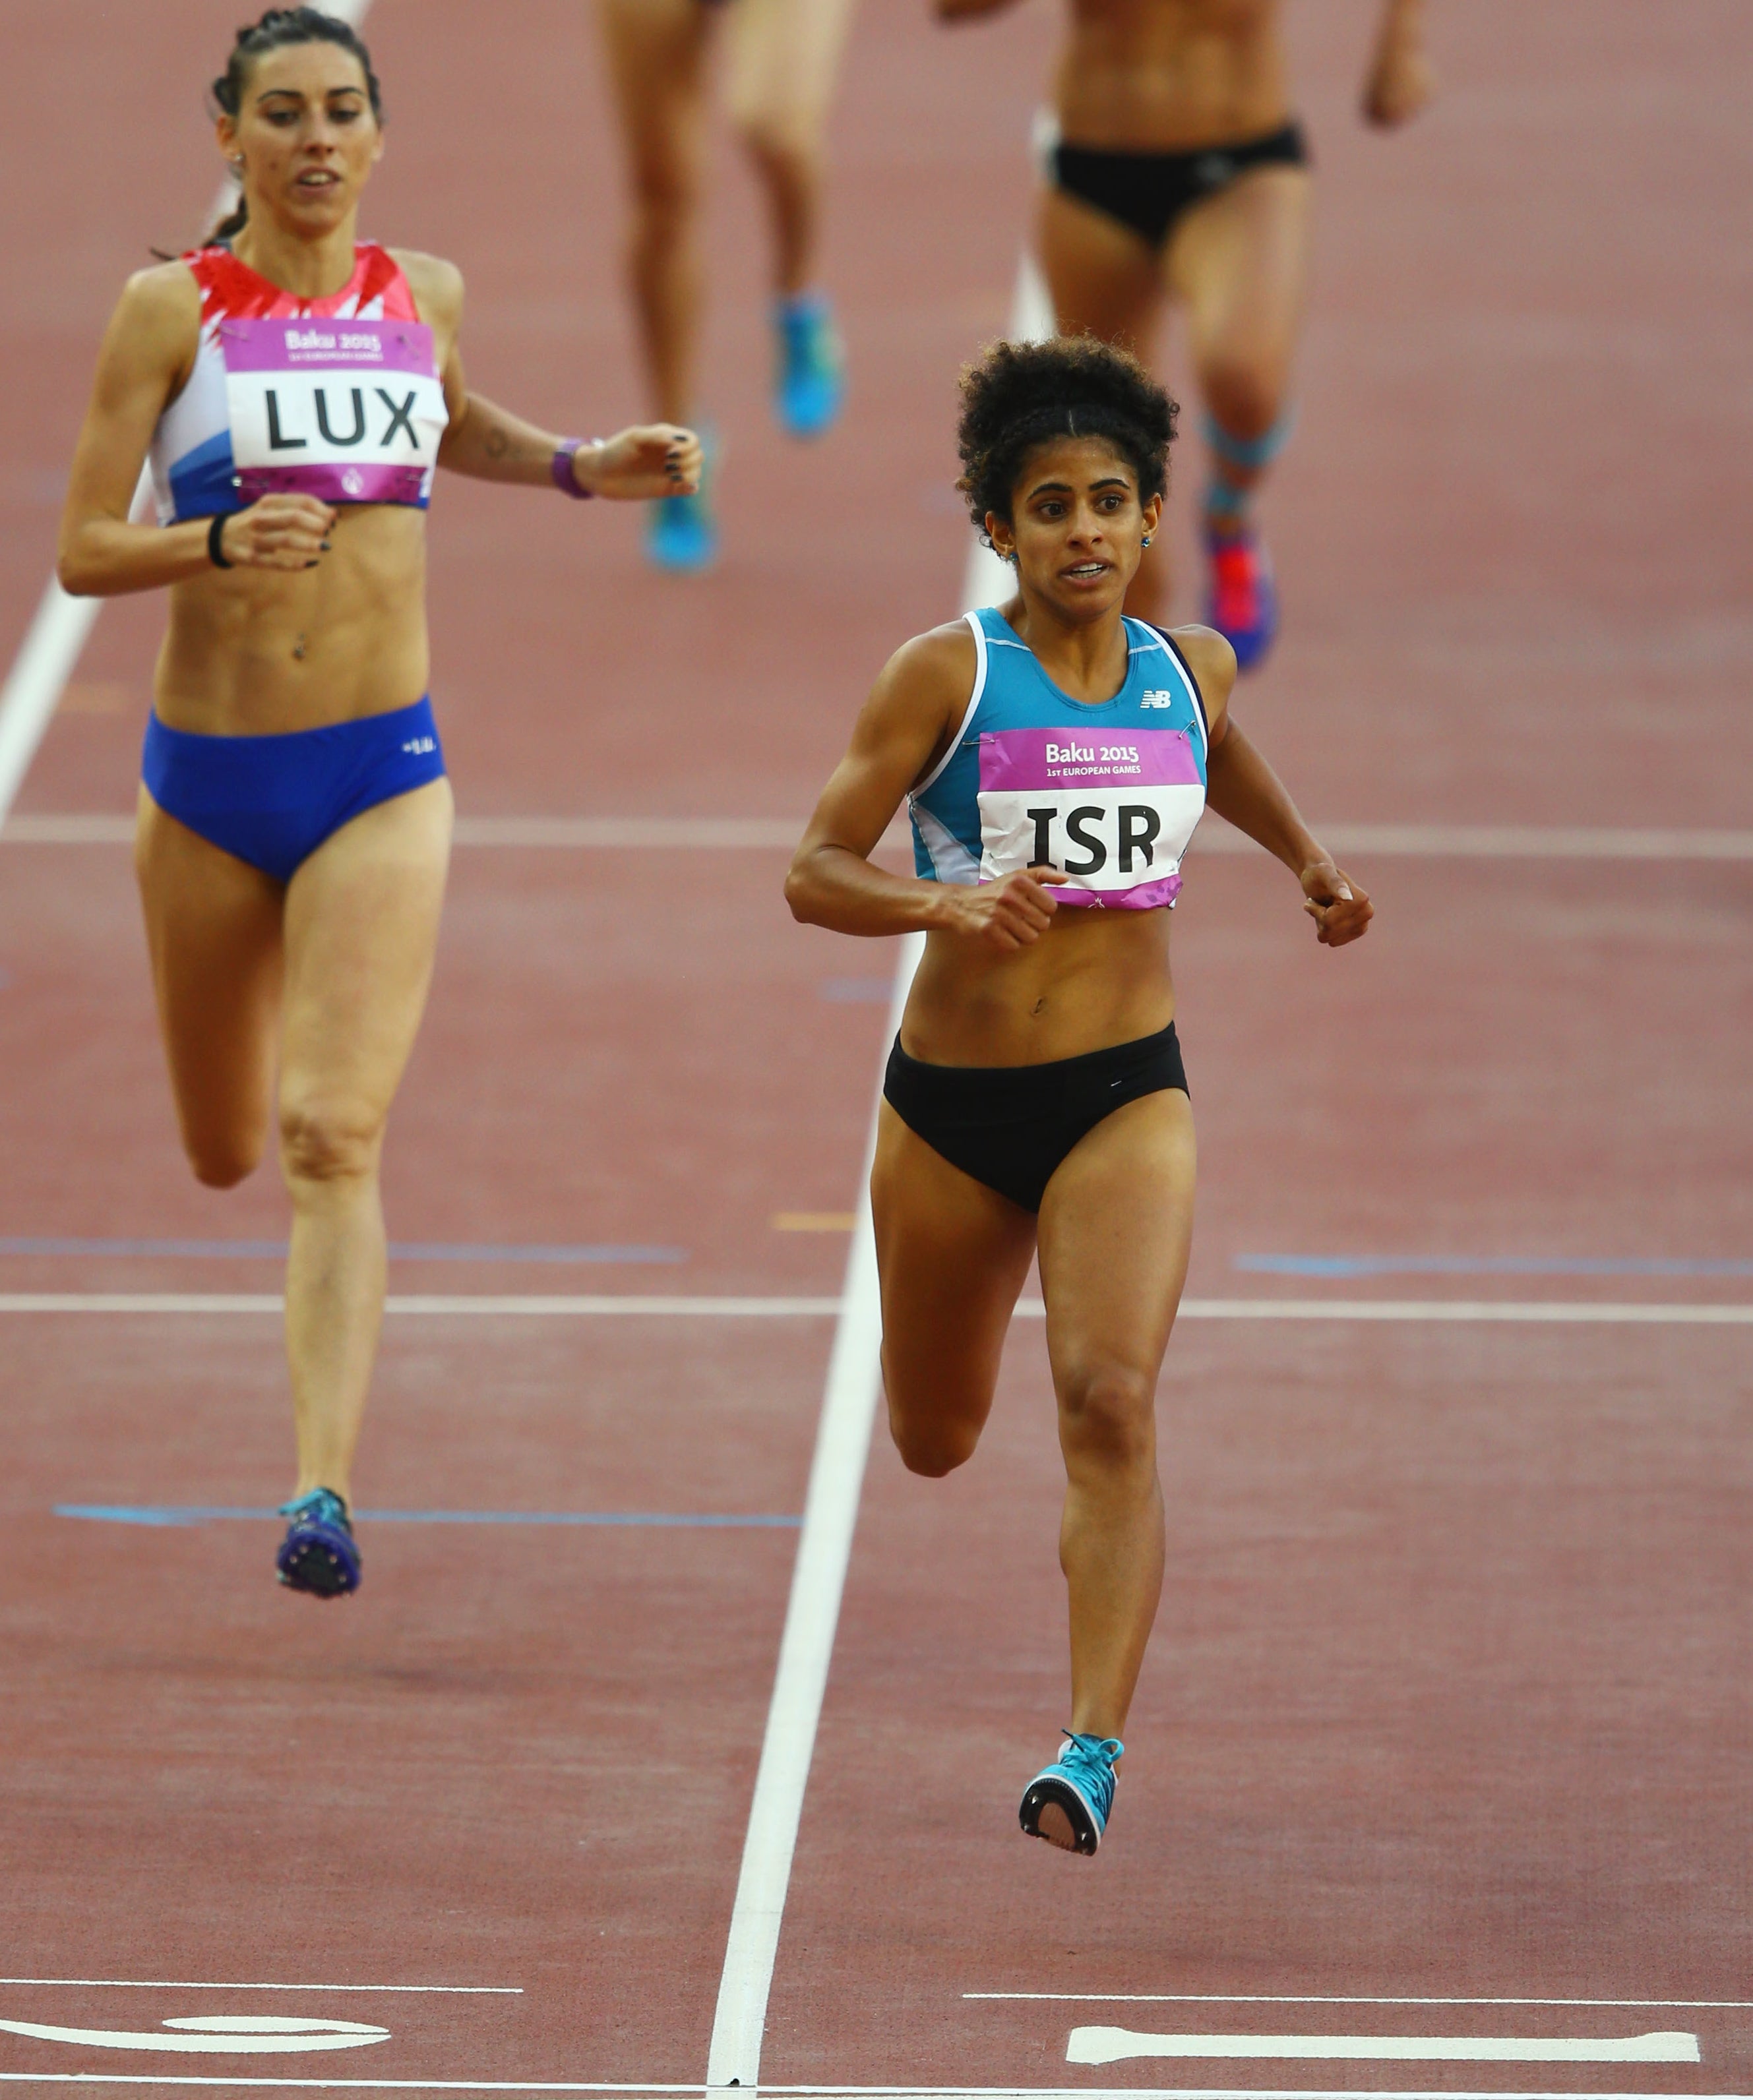 Maor Tiyouri of Israel (ISR) crosses the finish line in second ahead of Martine Nobili of Luxembourg in the Women&#x27;s 1500 metres during day ten of the Baku 2015 European Games at the Olympic Stadium on June 22, 2015 in Baku, Azerbaijan